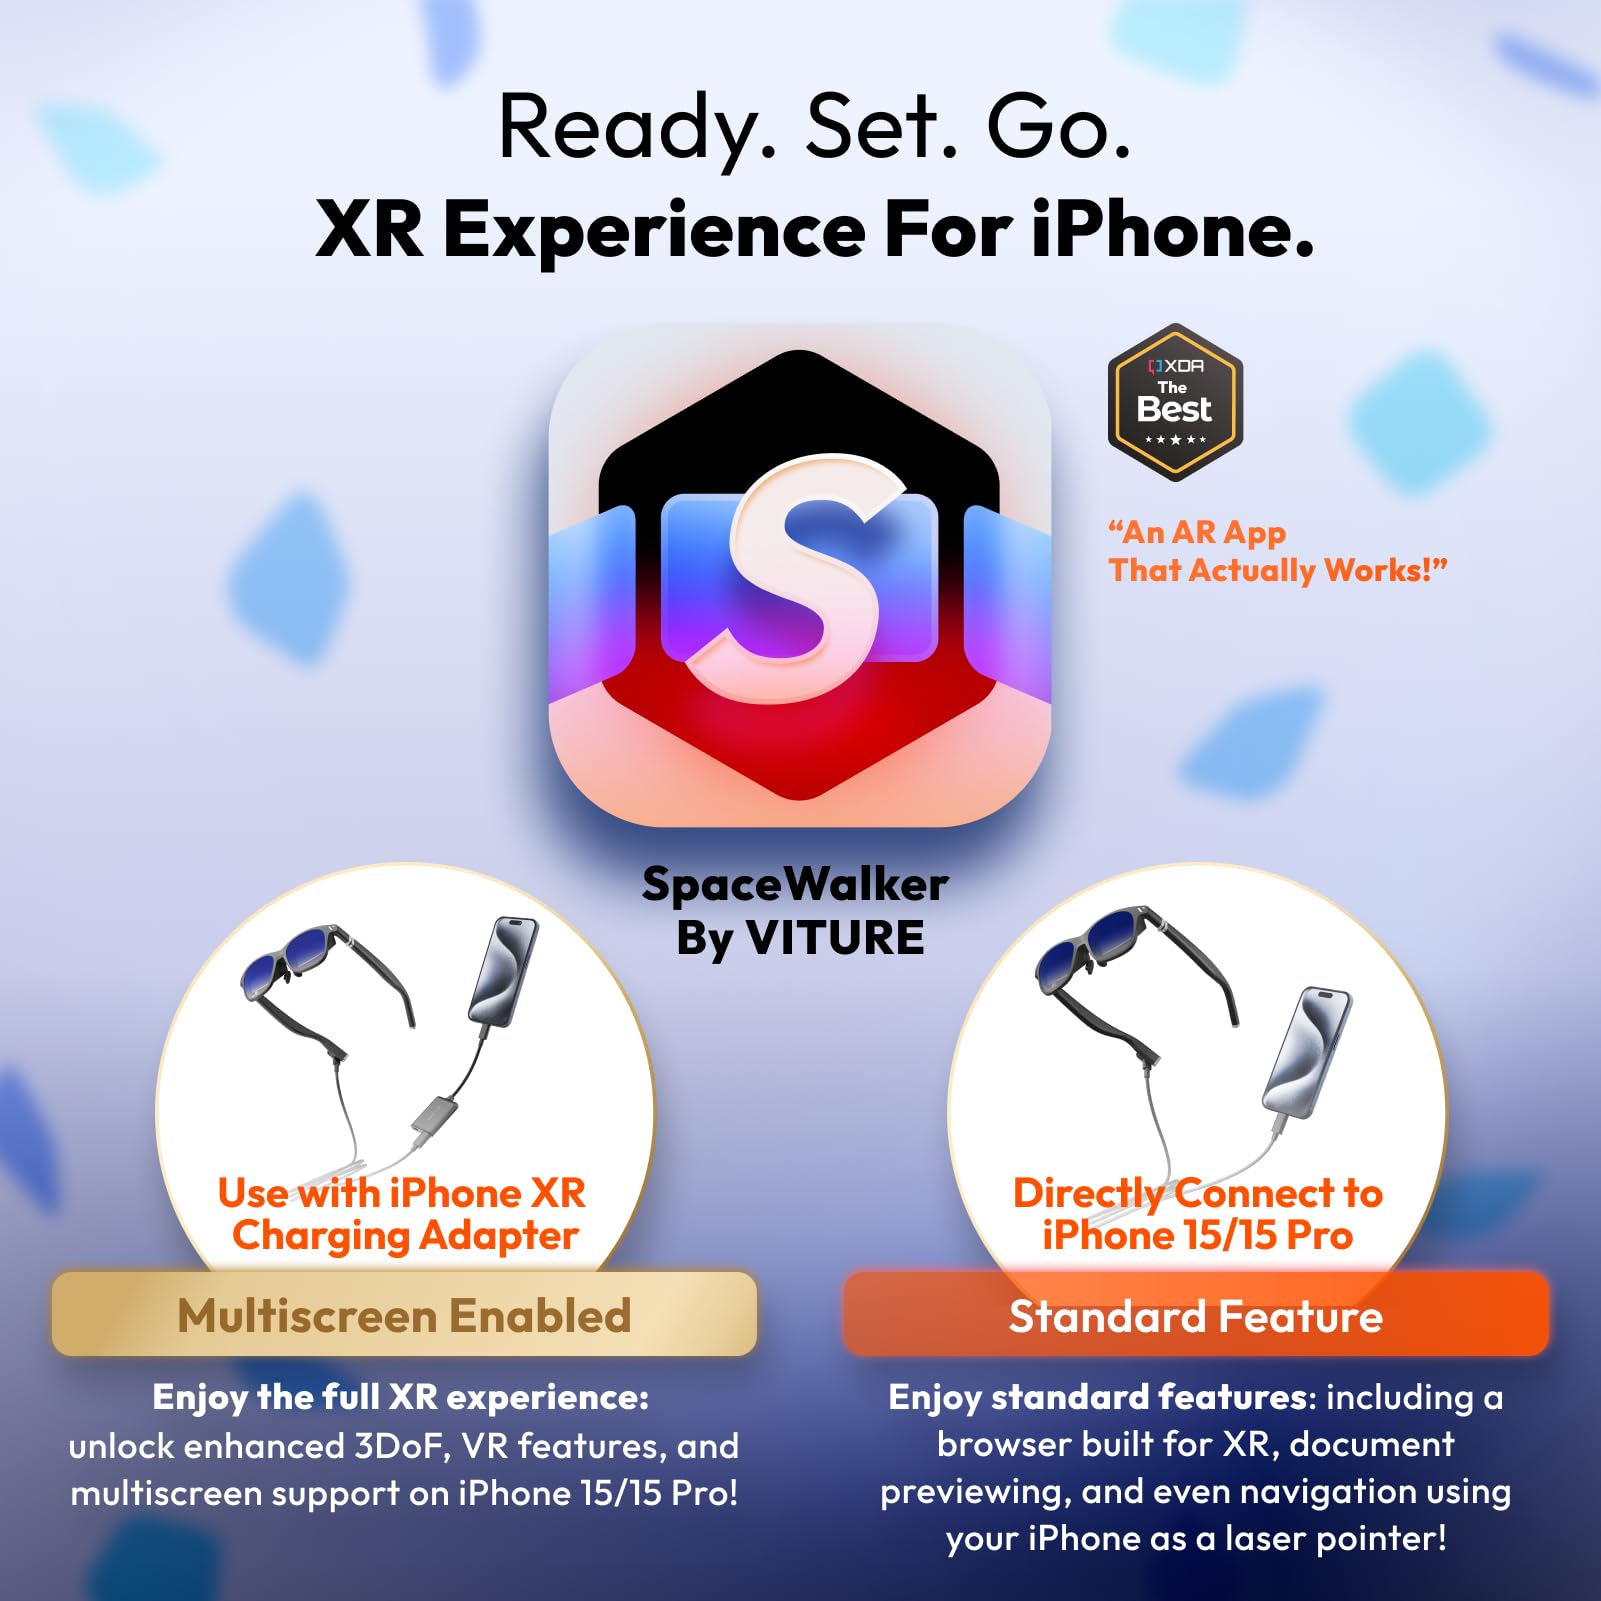 VITURE One iPhone 15 Pack: XR Glasses & USB- C iPhone XR Charging Adapter, Enabling Multi-Screen, Enhanced 3DoF, Spatial 3D, VR Video Features on iPhone 15/15 Pro, Charge and Play for Other Devices